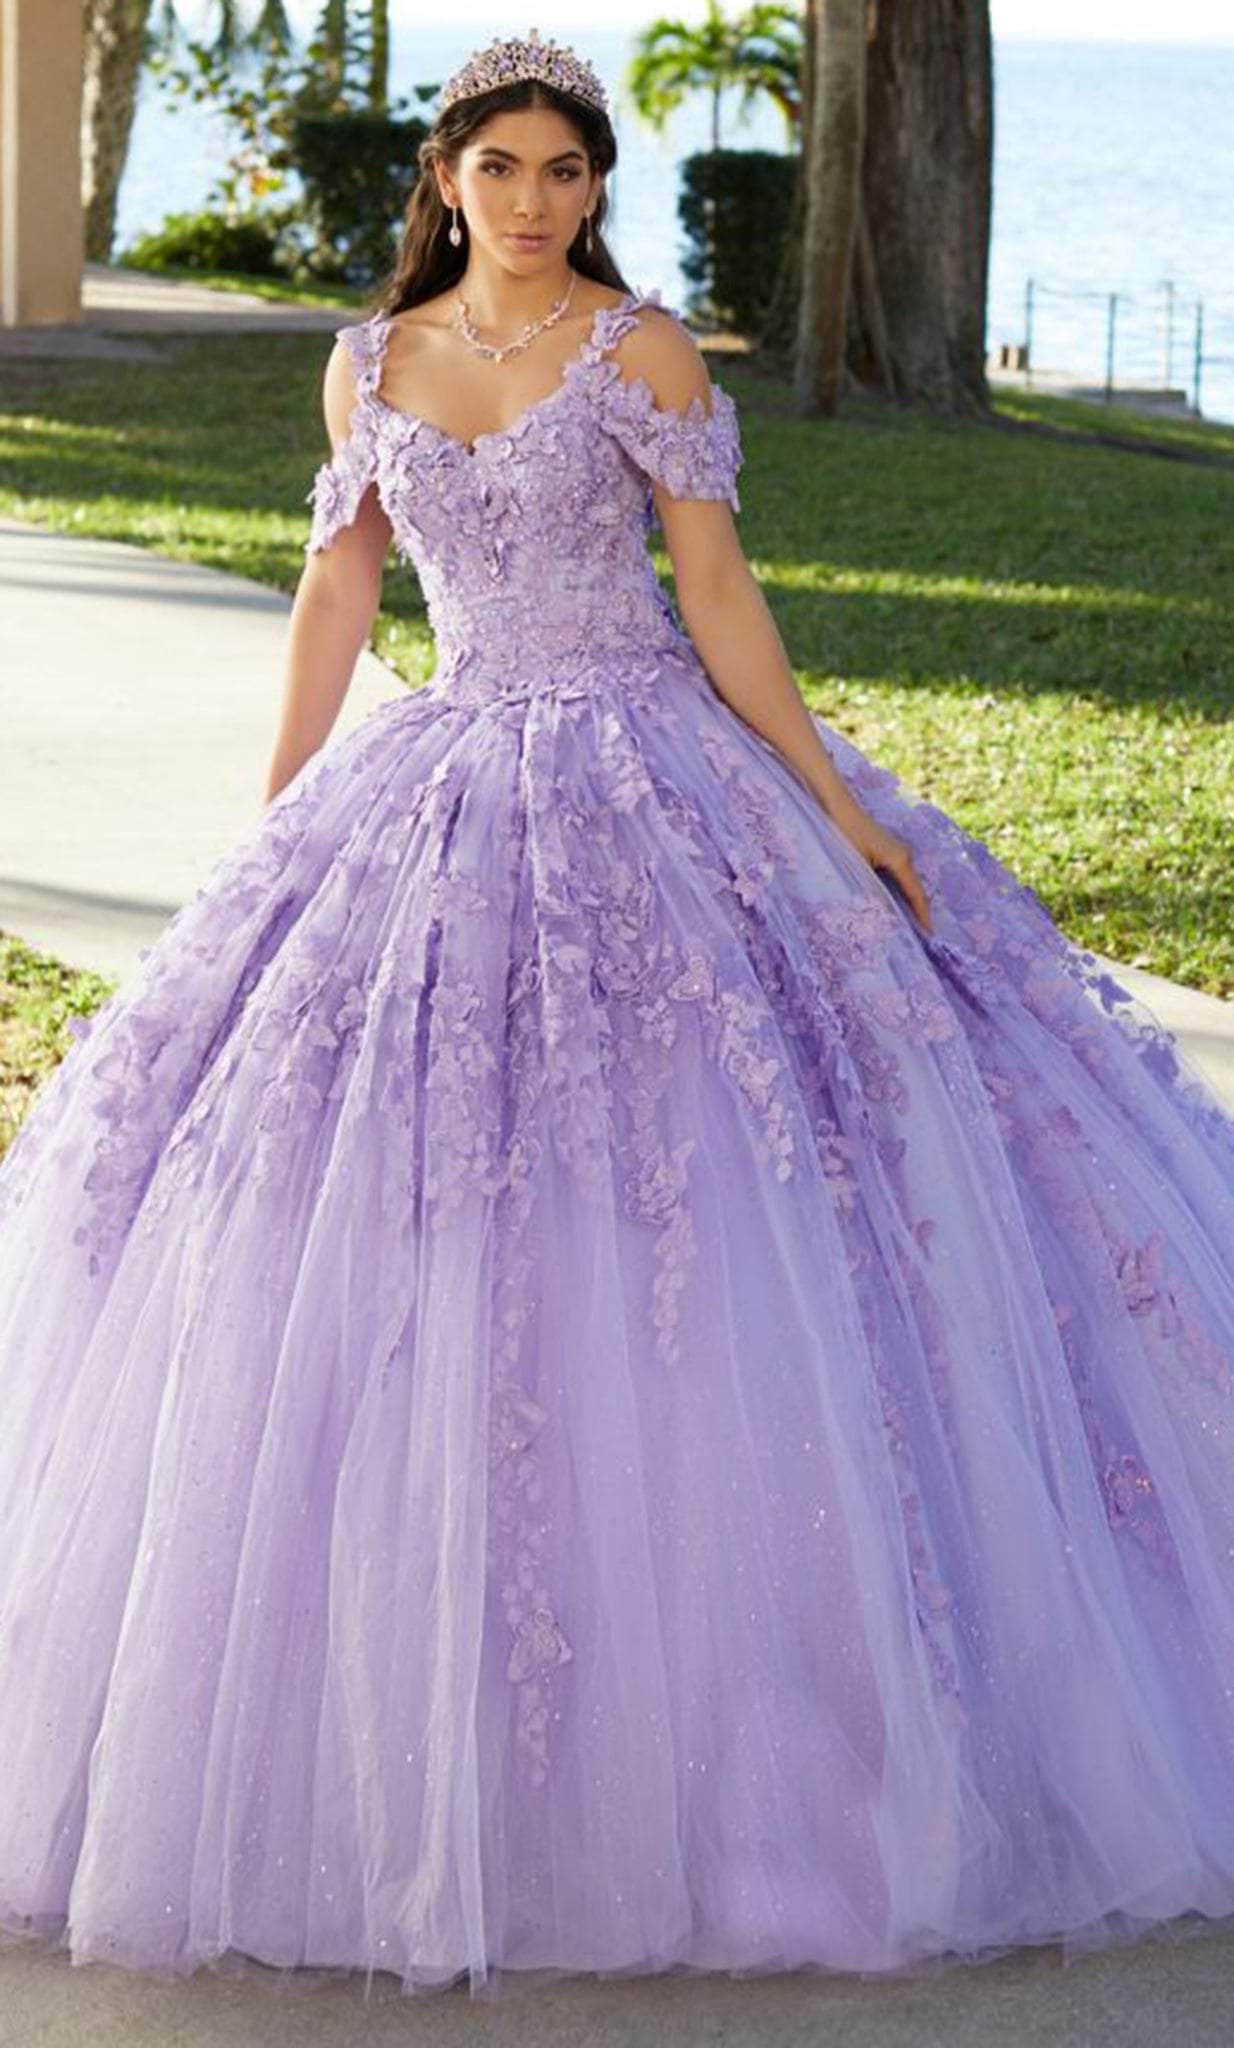 Image of Fiesta Gowns 56482 - Floral Applique Tulle Ballgown